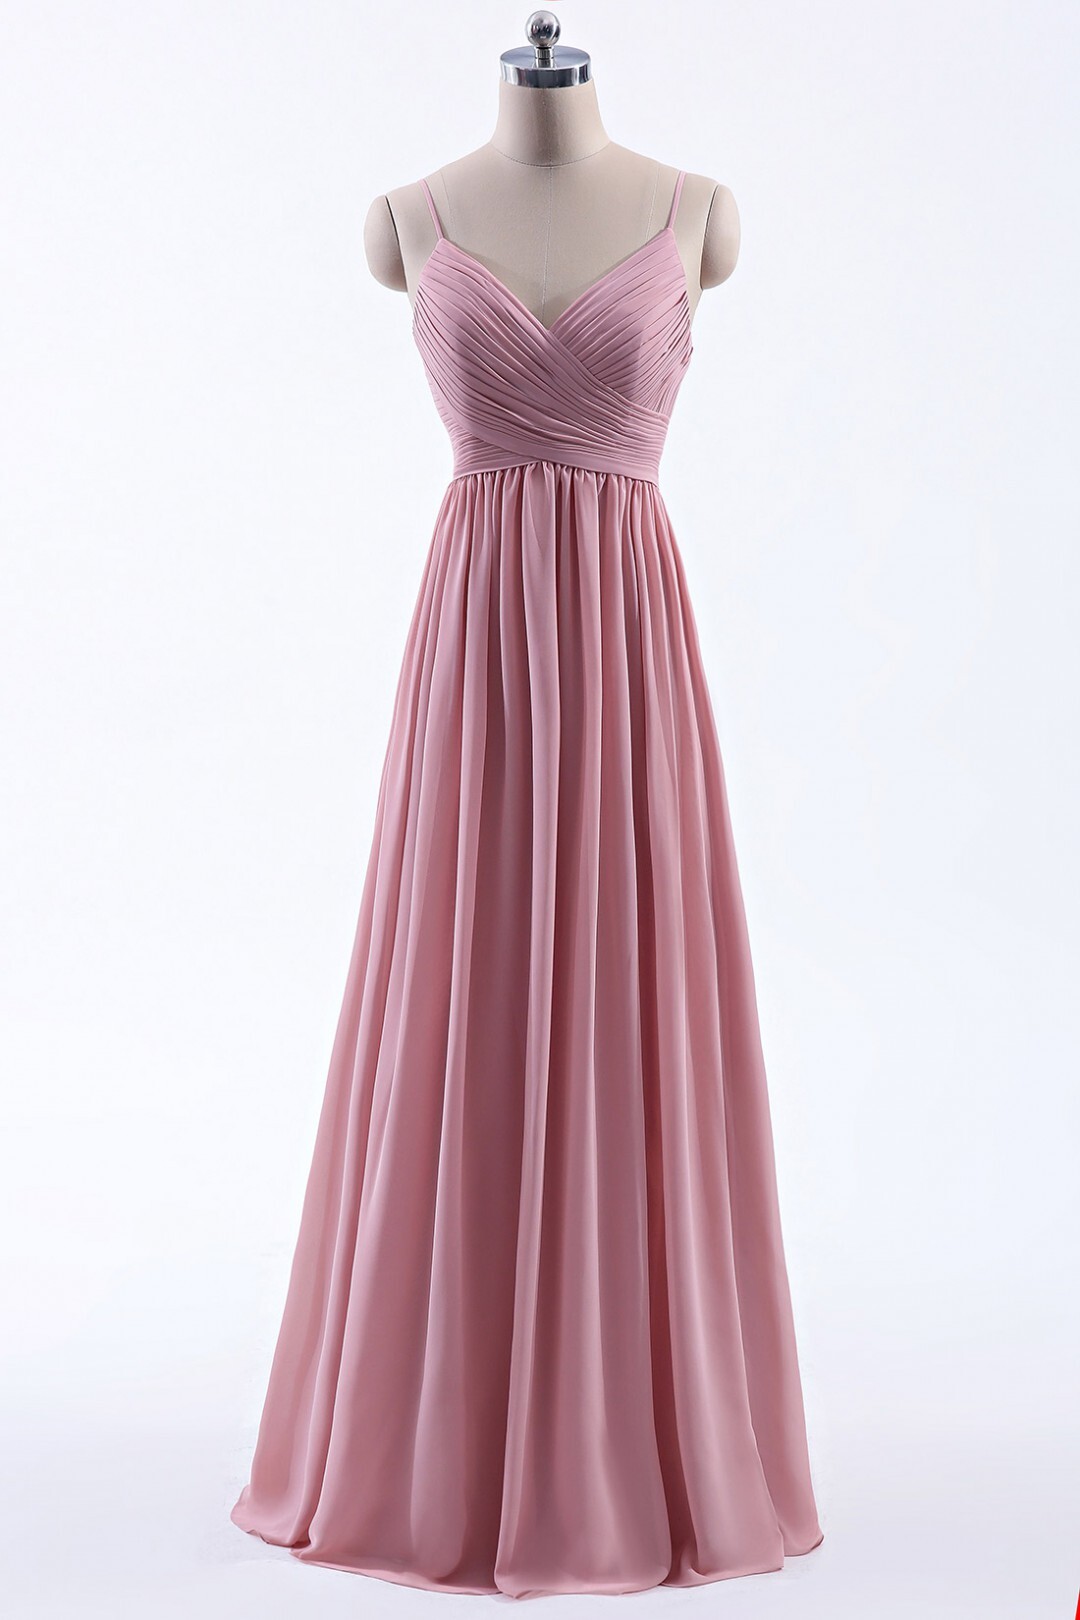 Blush Pink Straps Pleated A-line Long Bridesmaid Dress